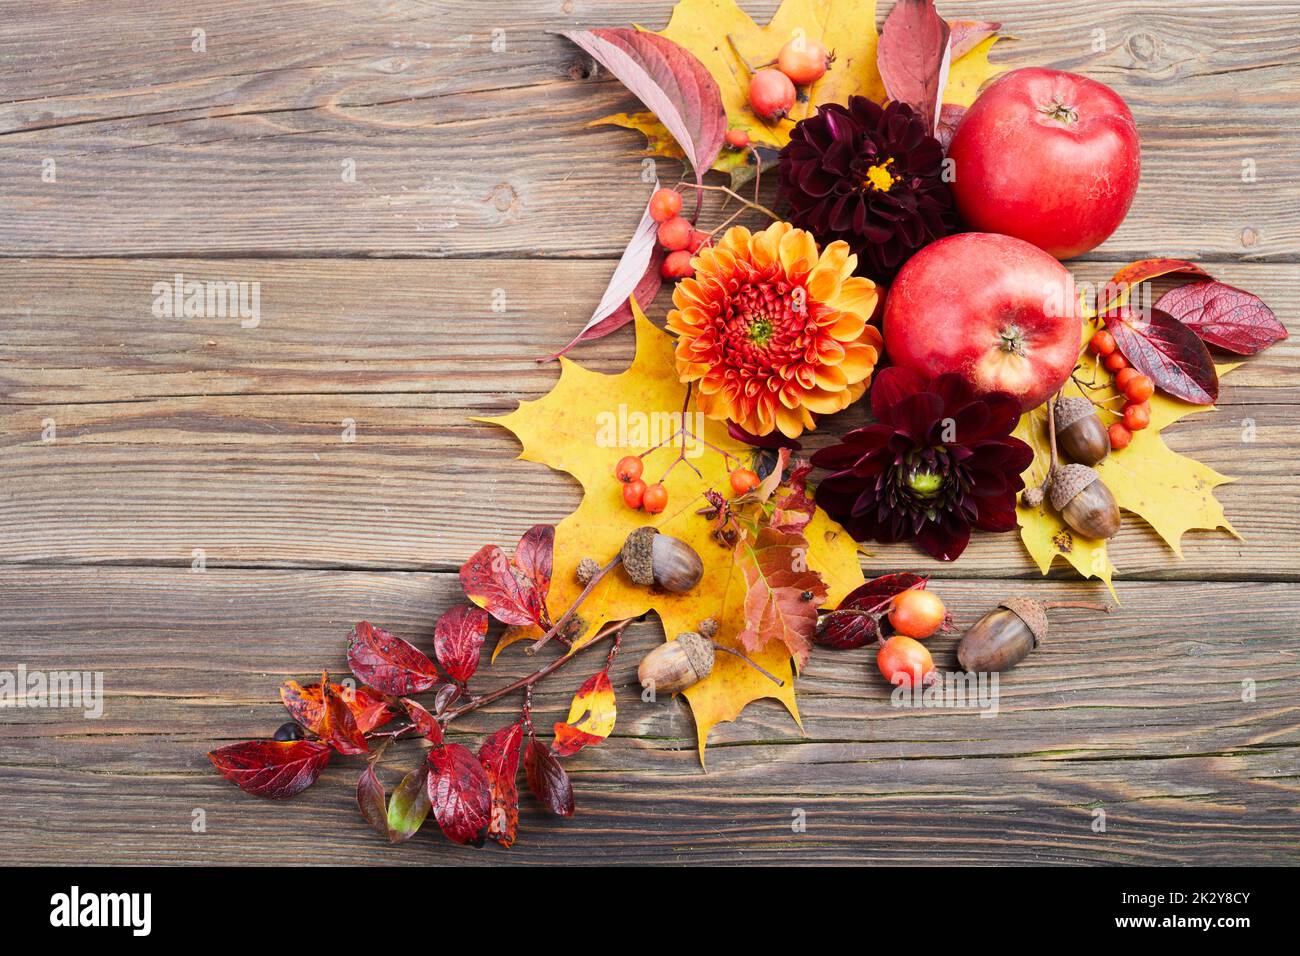 Composition of colorful fruits, berries, cones. Top view on wooden background. Autumn flat lay. Stock Photo